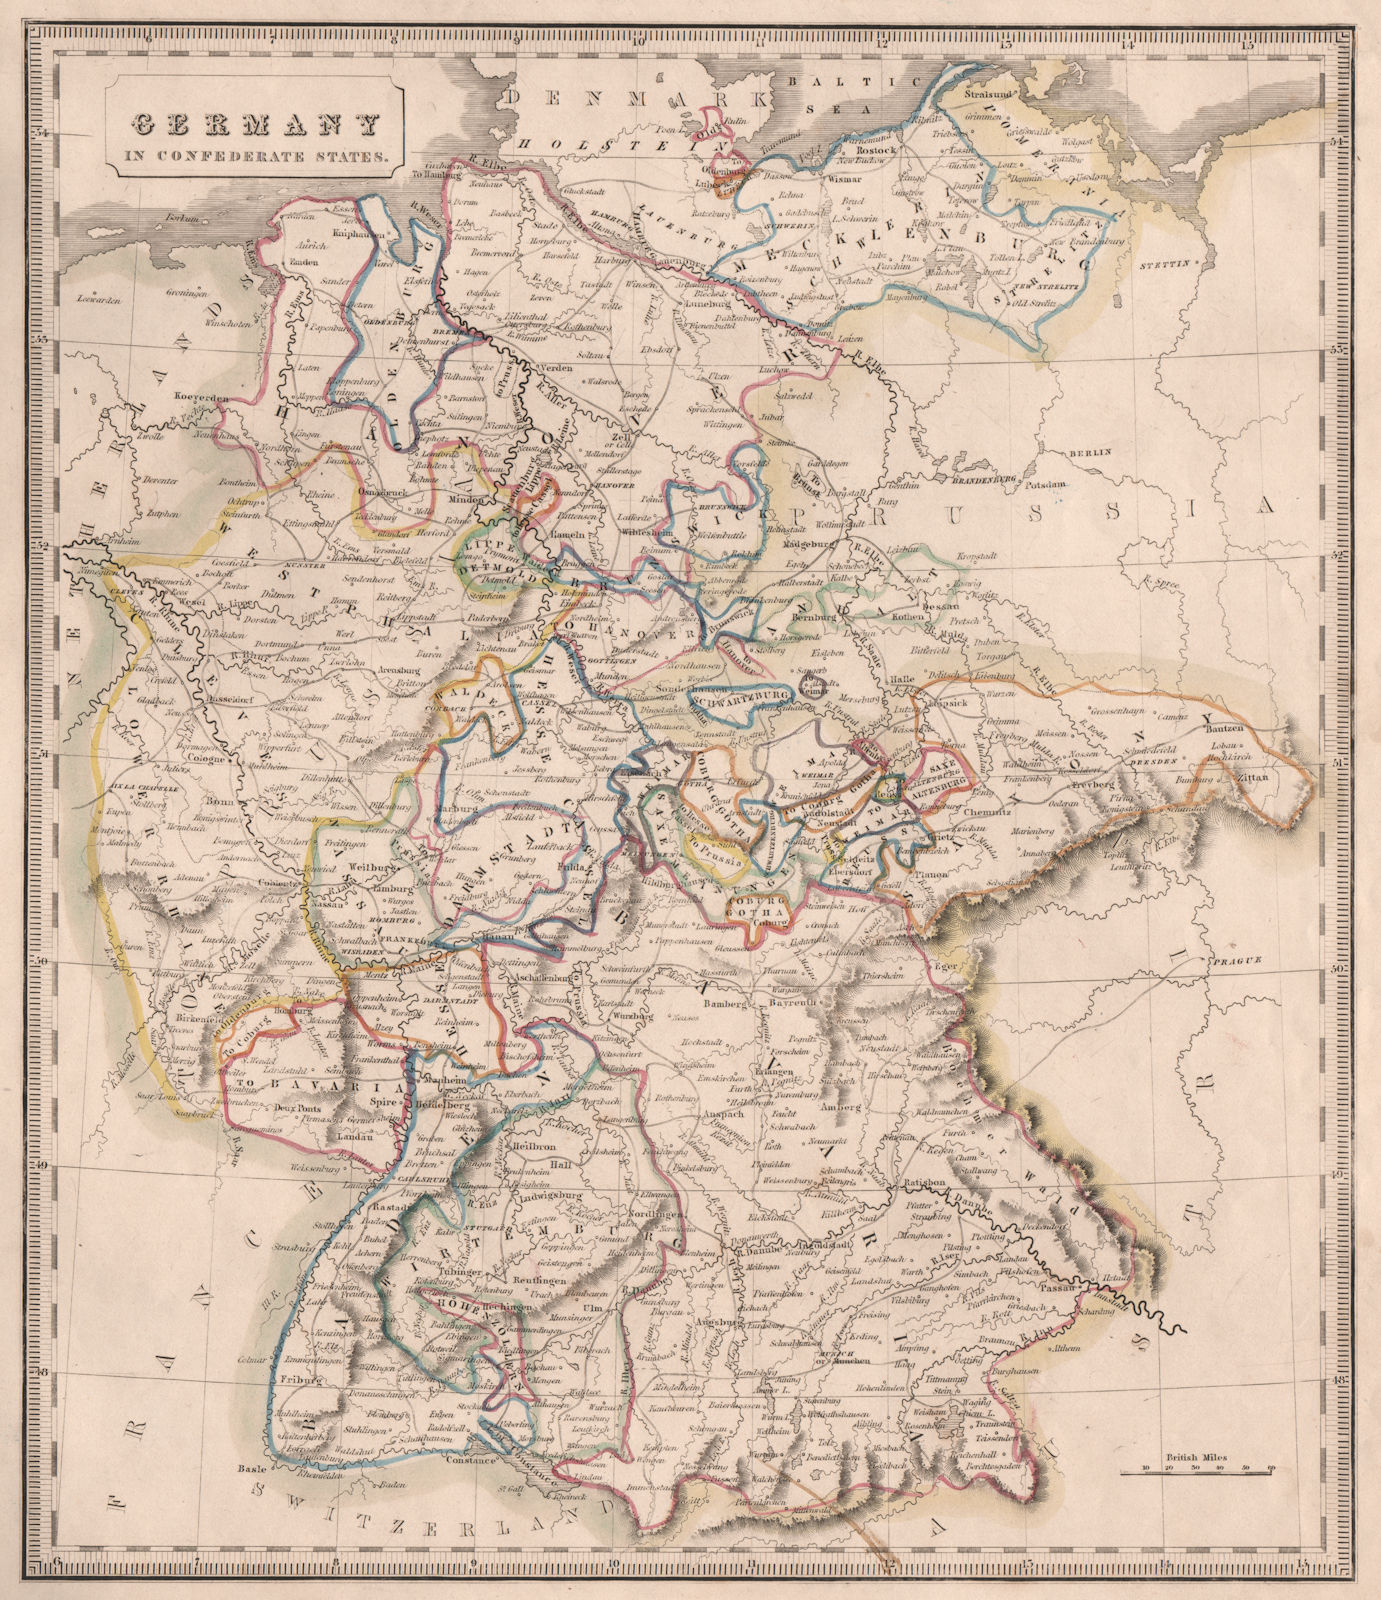 GERMANY IN CONFEDERATE STATES. Rivers. Bavaria Hanover &c. JOHNSON 1850 map